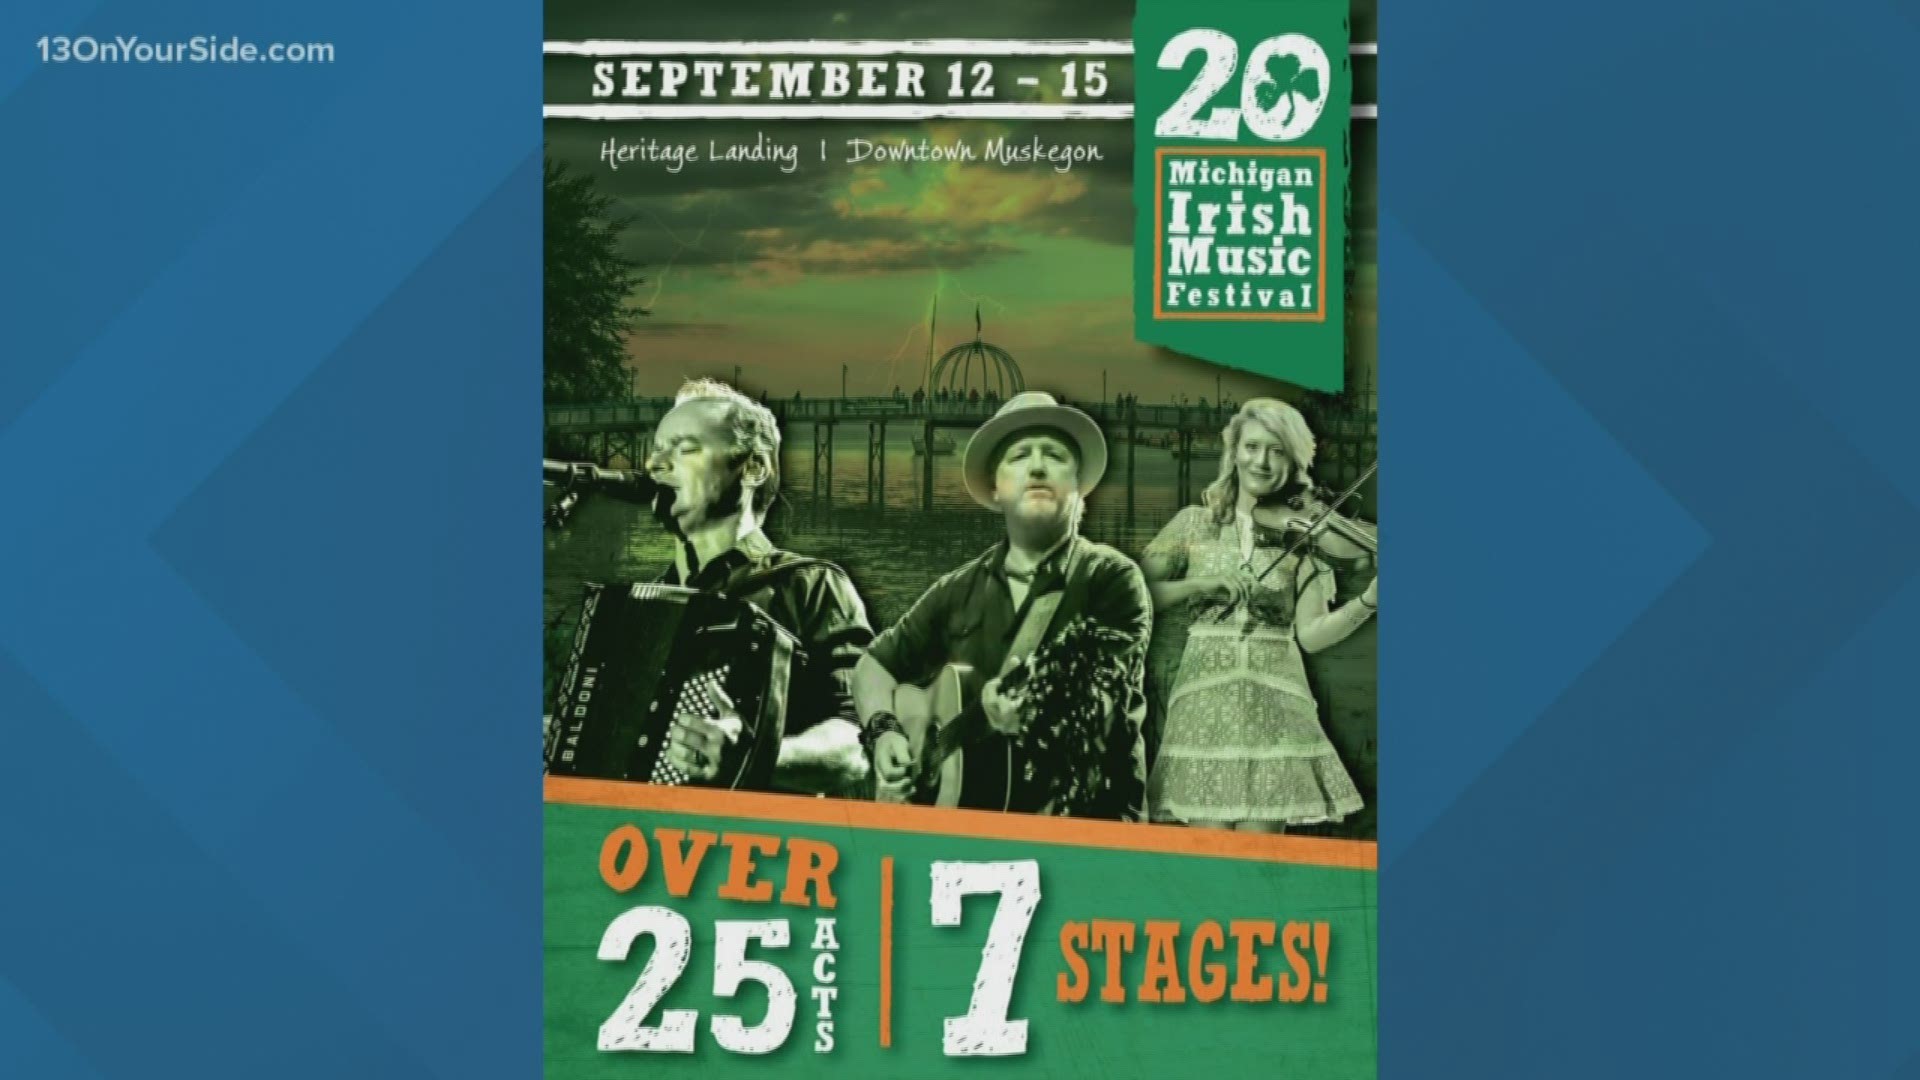 From Whiskey tasting and naughty limericks to Highland Games and a full schedule of great Irish music, this festival has it all.  We got a sneak peek at solo artist Shane Hennessy.